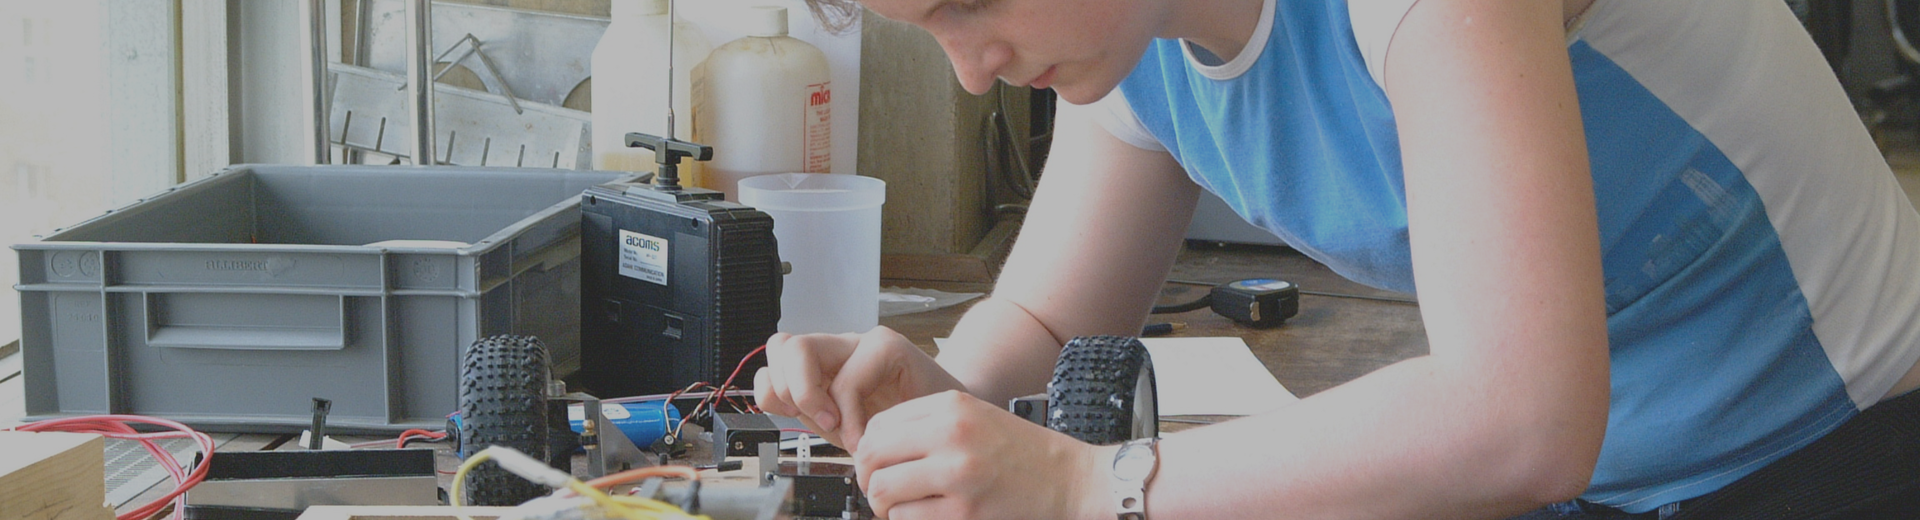 Student working in lab on electrical project